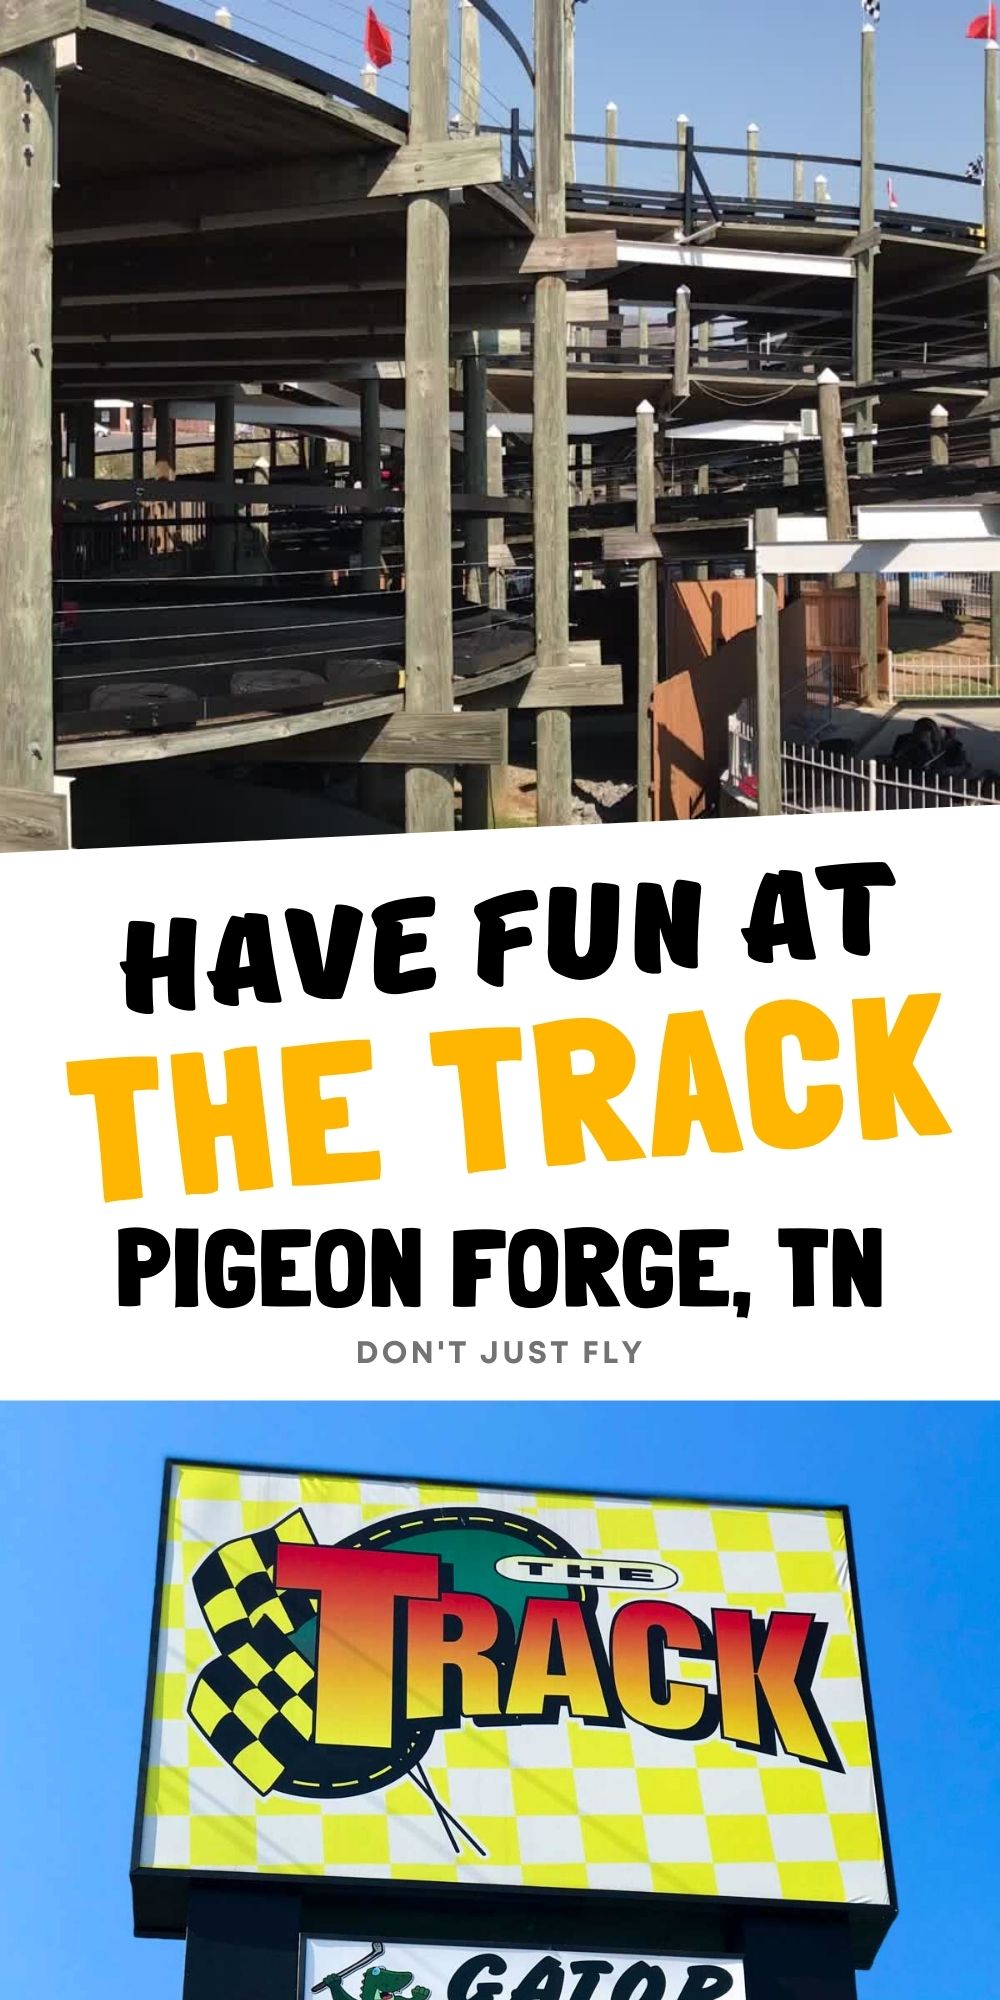 A photo collage shows images from The Track in Pigeon Forge